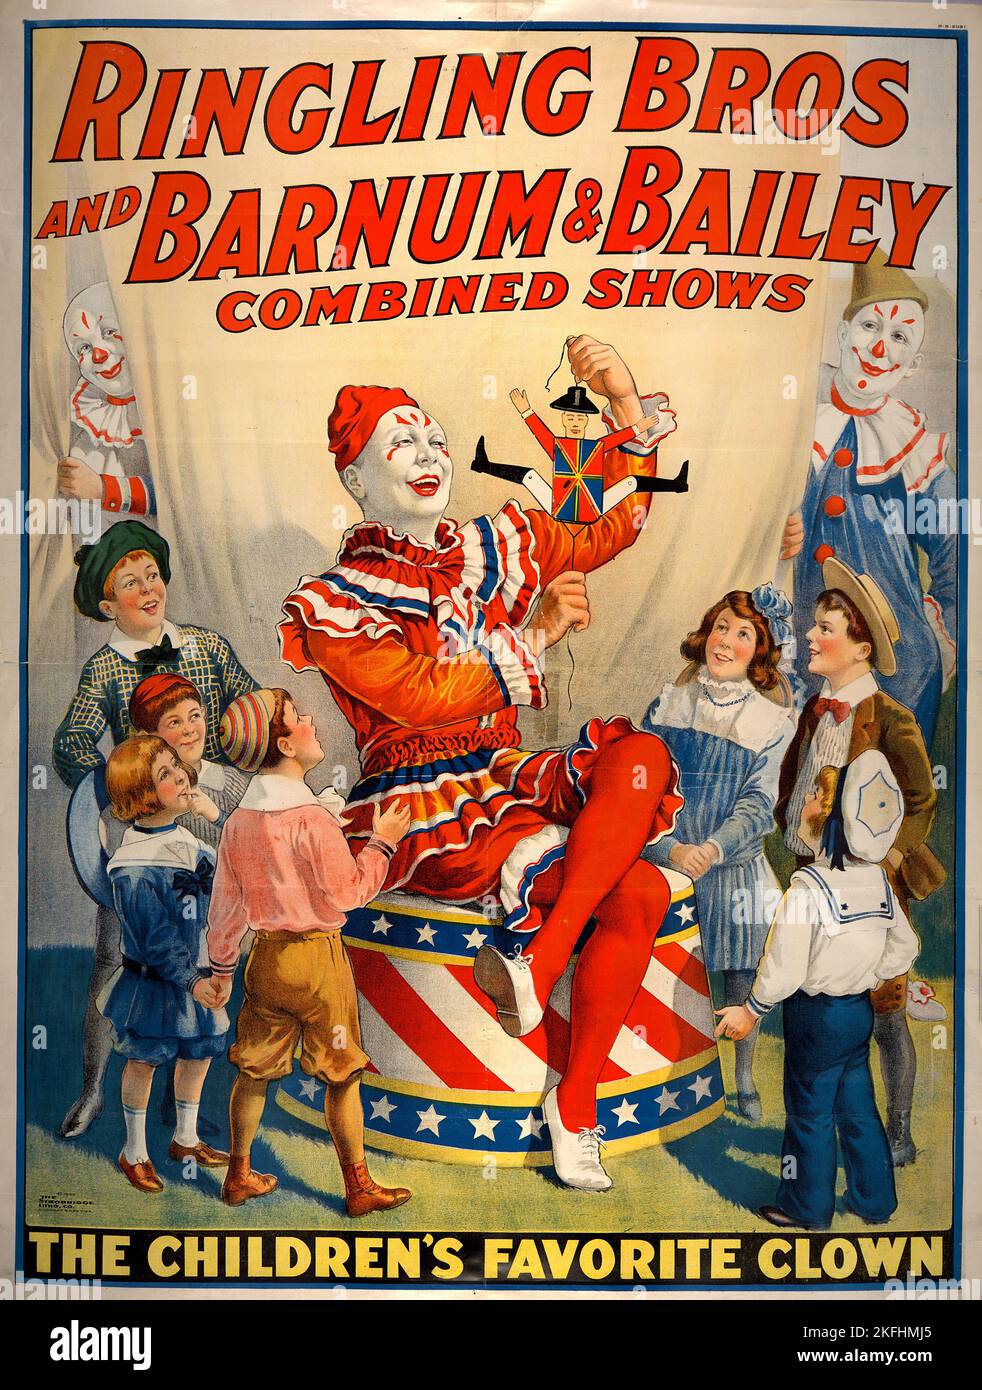 Ringling Bros and Barnum &amp; Bailey combined shows circus poster, c1920. [Publisher: Strobridge Litho Co.; Place: Cincinnati [Ohio]] Stock Photo